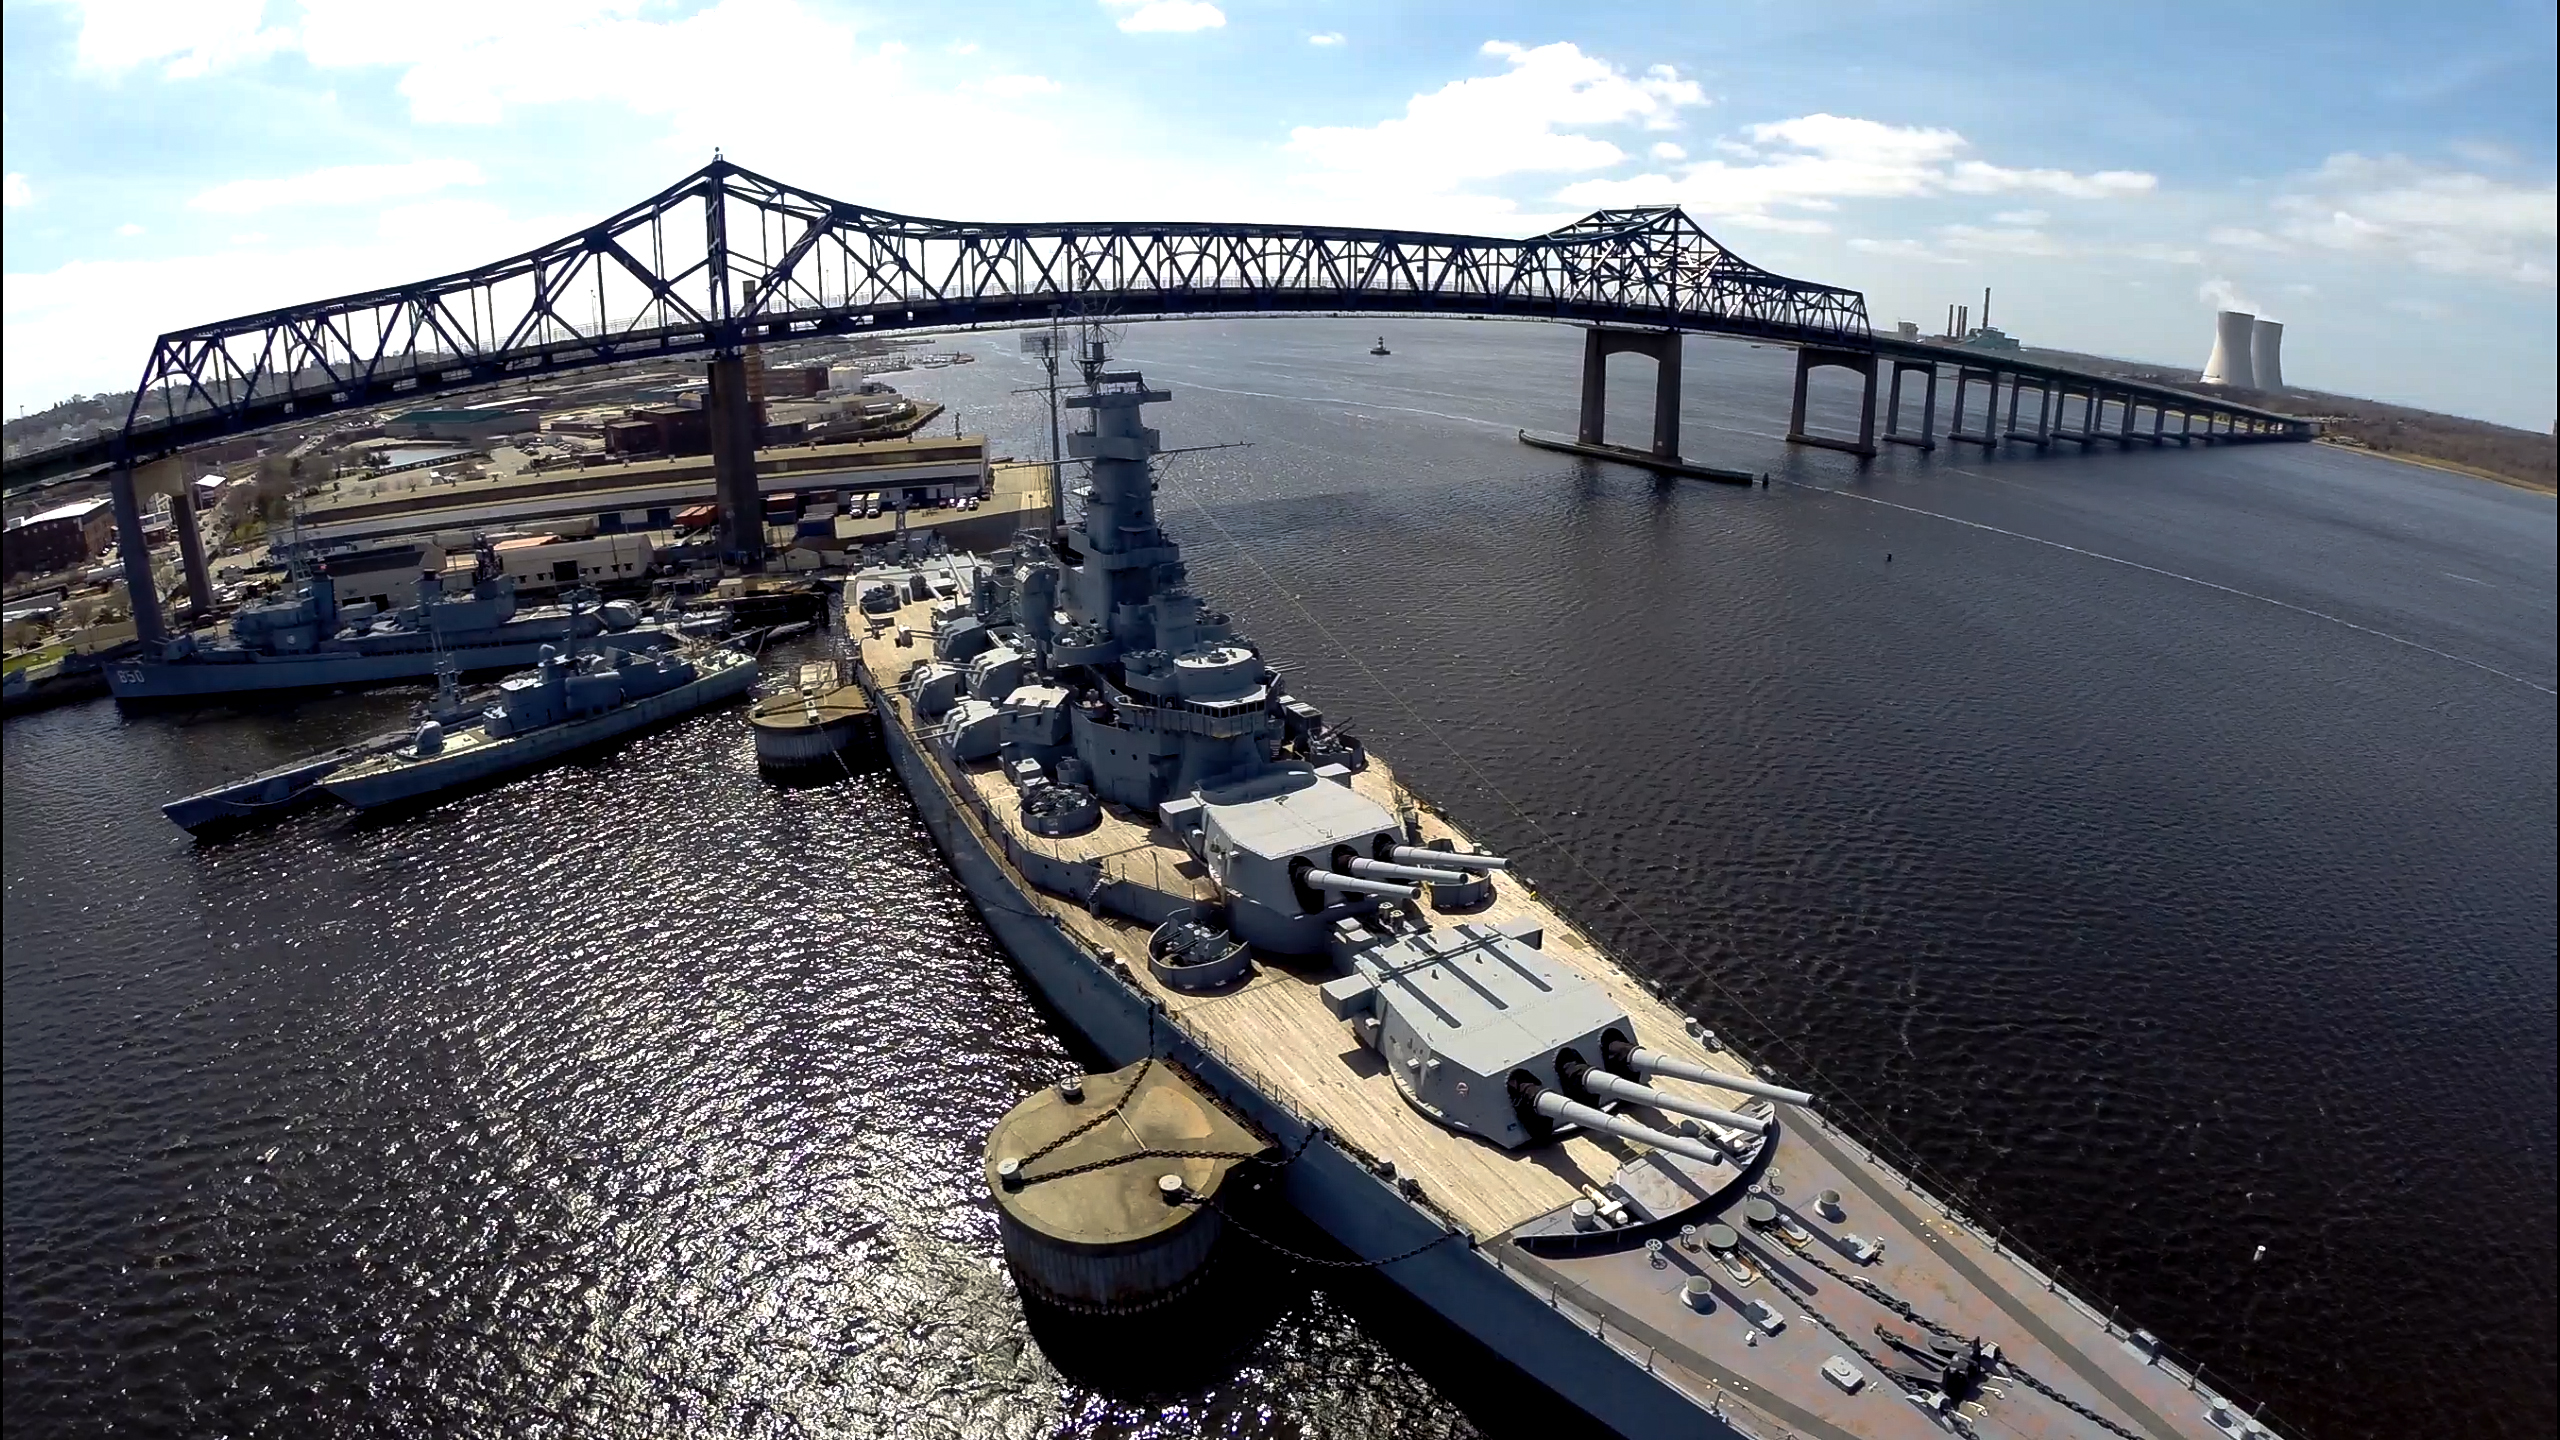 BattleShip Cove | PVD Aerial Productions | Your world from 400ft high